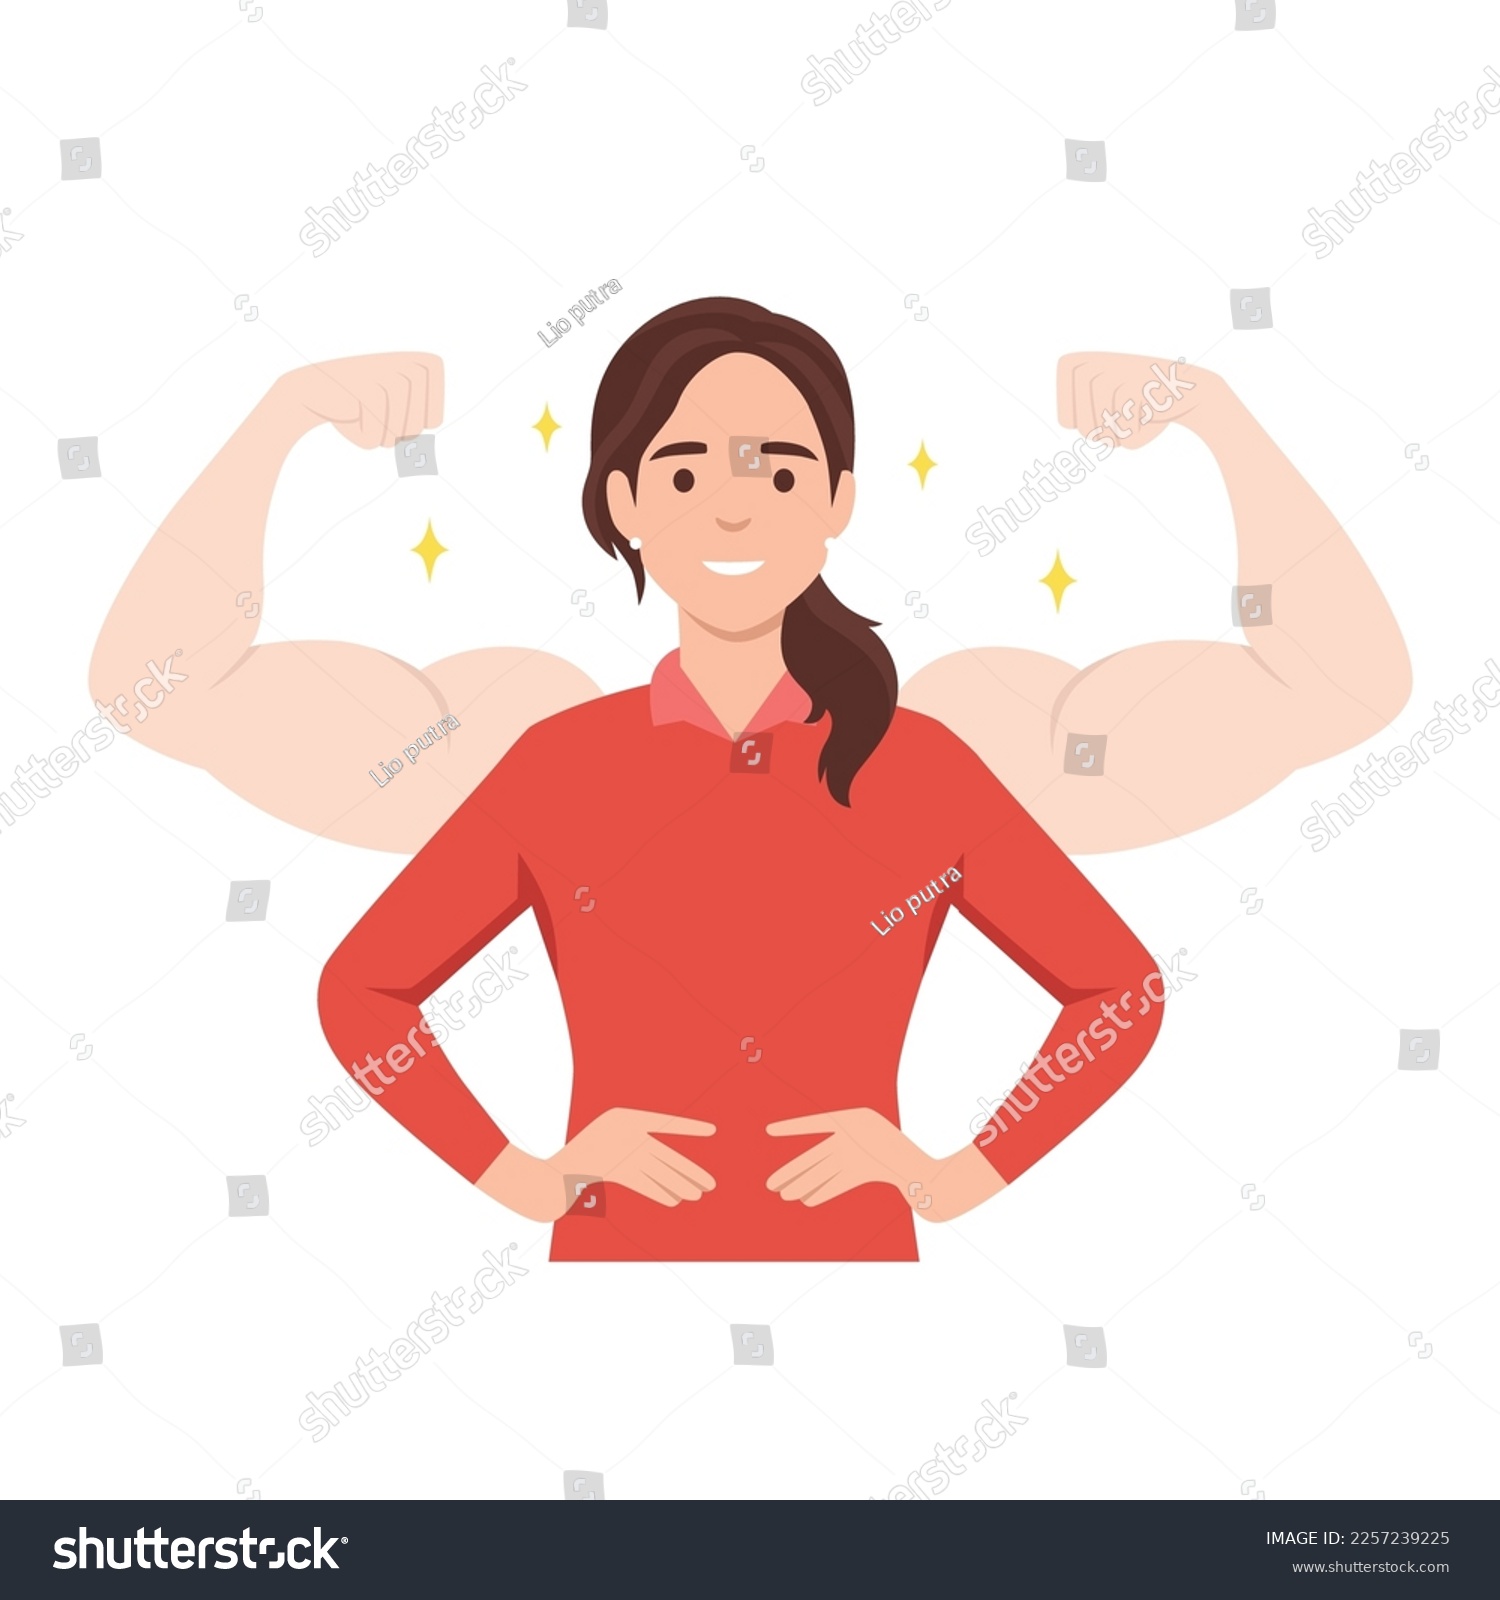 Young woman power, female self confidence, high esteem concept. Brave confident smiling woman standing showing biceps shadows facing fears like powerful hero. Flat vector illustration isolated #2257239225